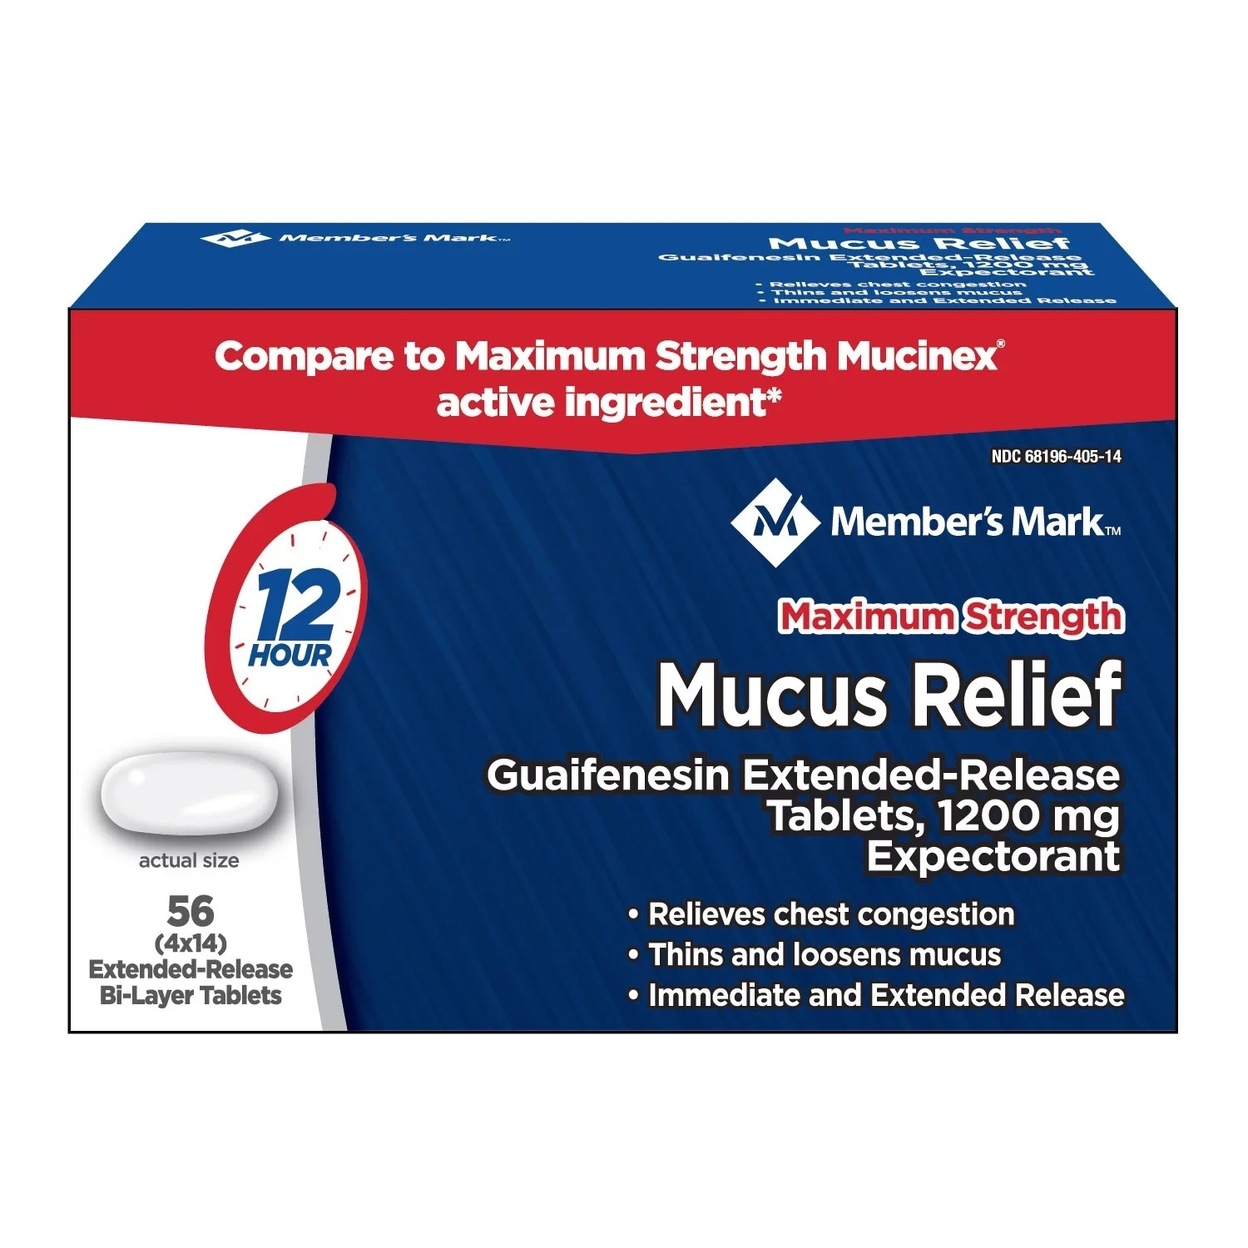 Member's Mark Max Strength Mucus Relief Guaifenesin 1200mg ER Tablets (56 Count)